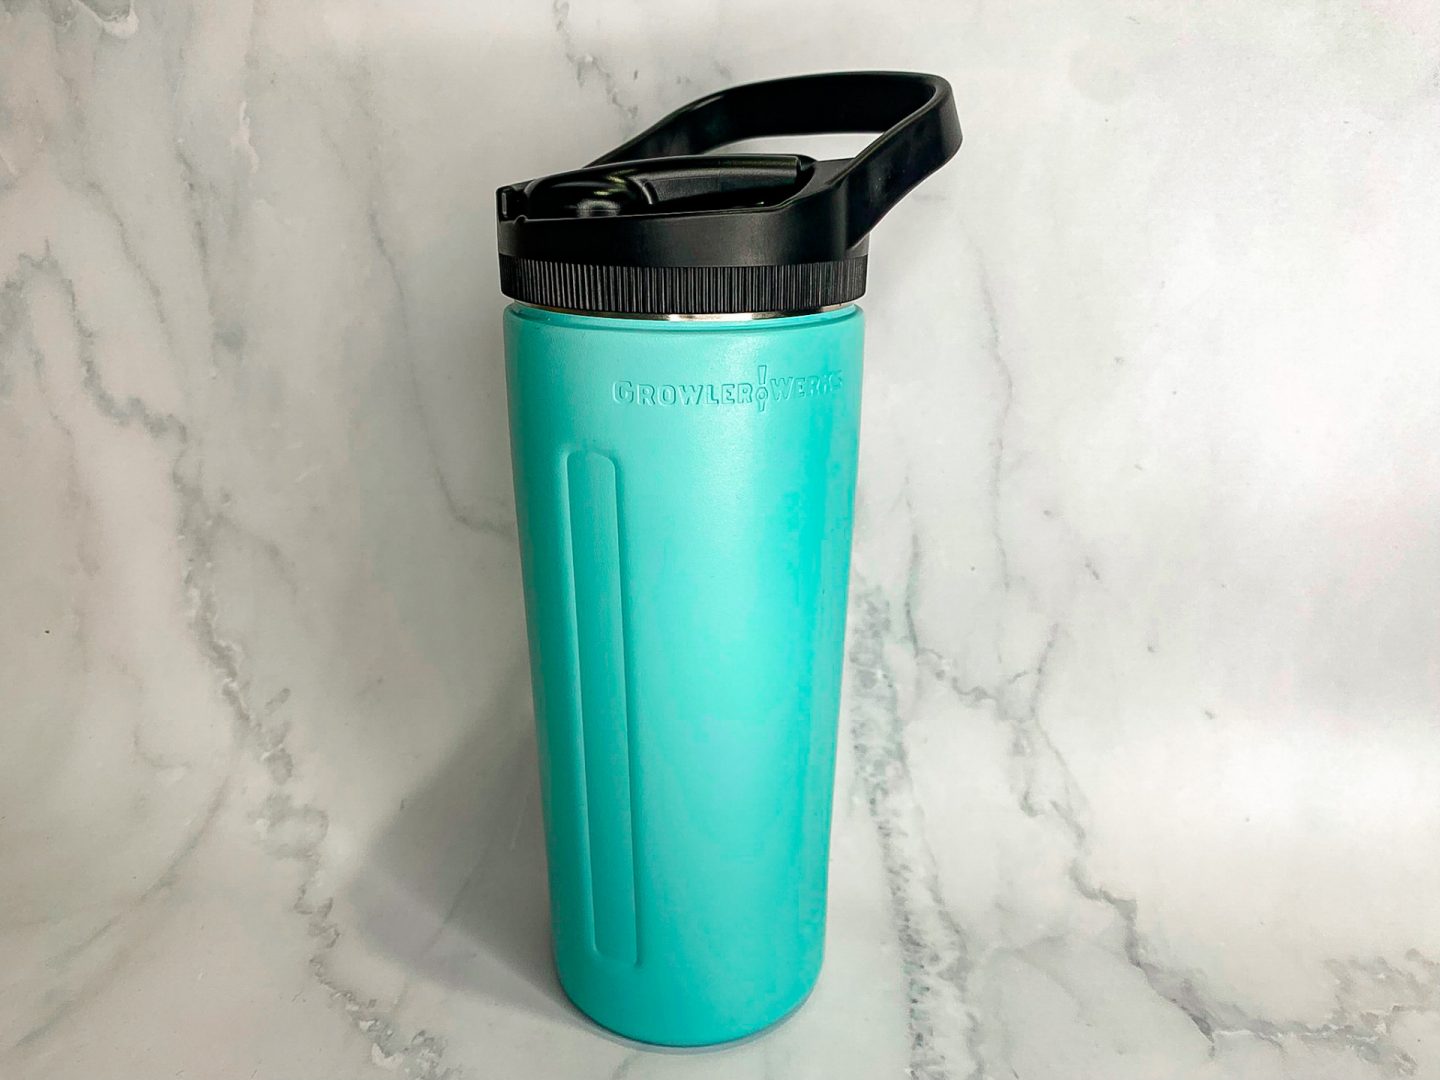 5 Safe, No-Leak, Easy-to-Clean Water Bottles for Big Kids (yes, they do  exist!) - what moms love